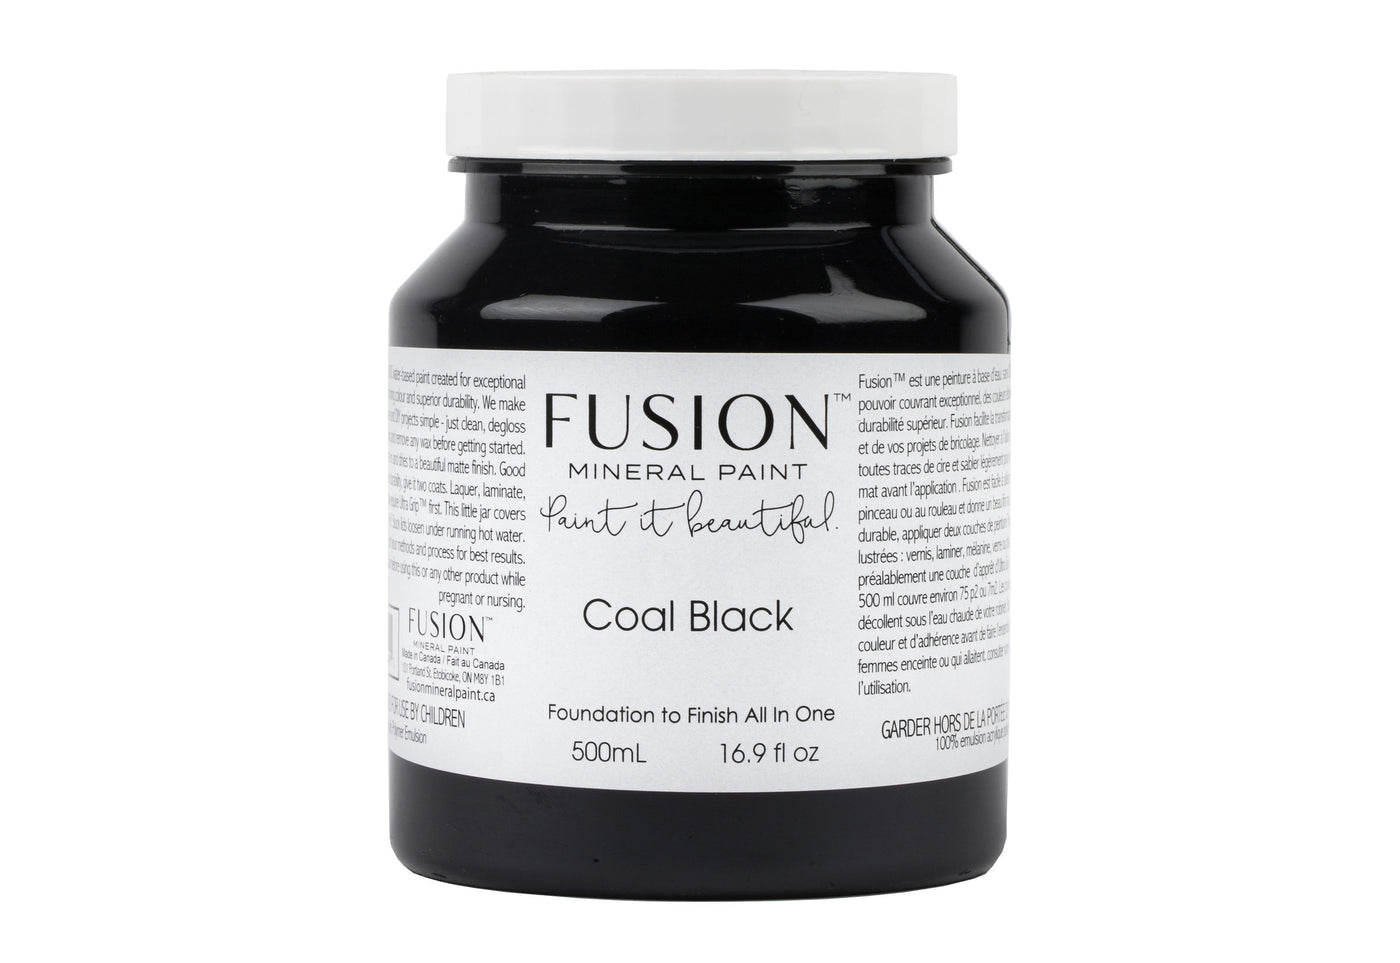 Coal black 500ml pint from Fusion Mineral Paint